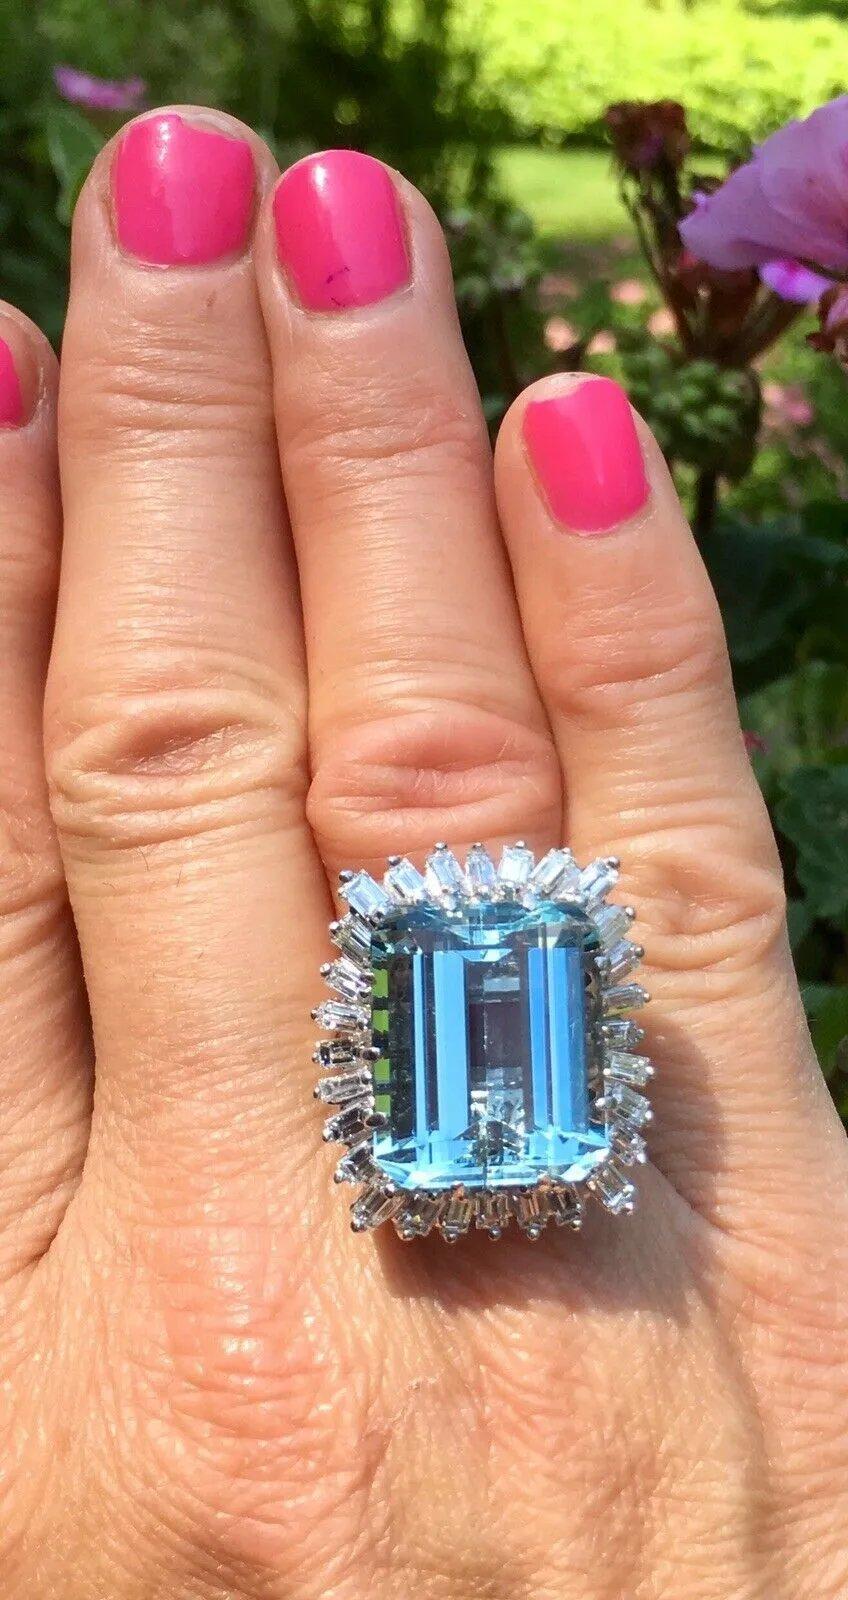 This impressive statement ring features a large emerald cut aquamarine (estimated 16.65 carats set vertically in ten prongs and measures 17.85 x 14.84 x 9.28 mm) with medium to strong blue color and clarity of VVS.

The ring is further surrounded by